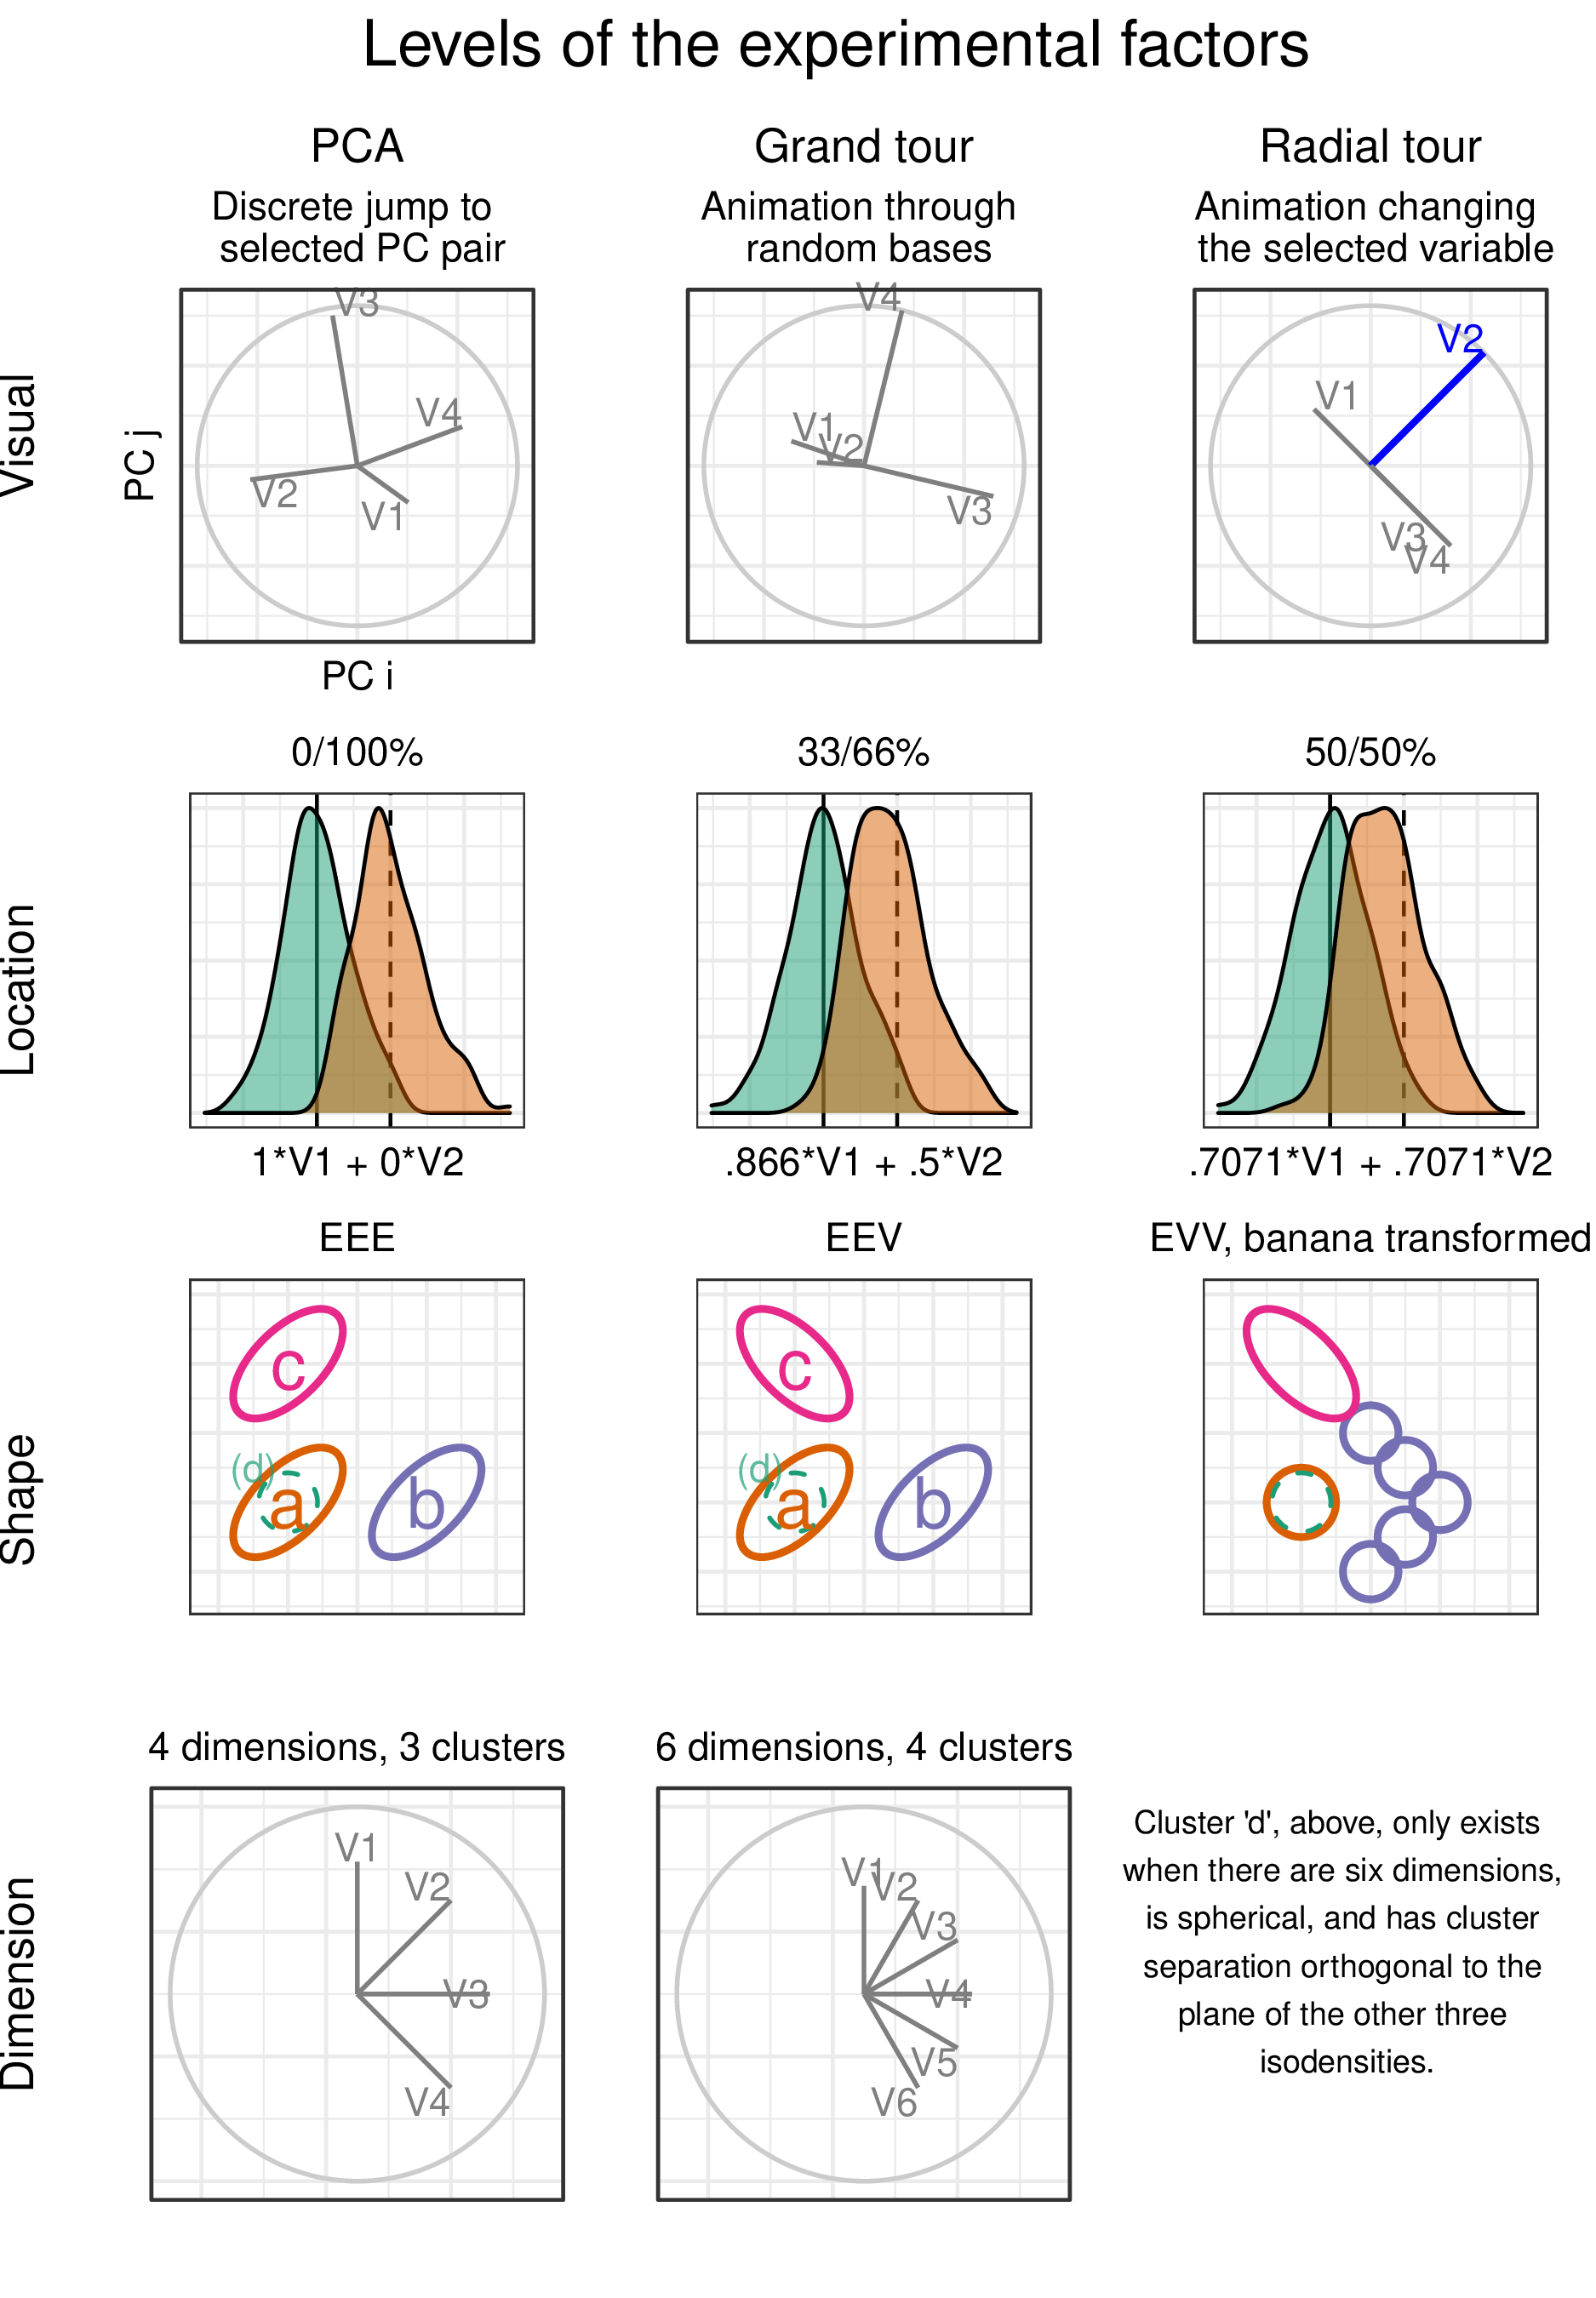 Levels of the visuals and three experimental factors: location of cluster separation, the shape of clusters, and dimensionality of the sampled data.